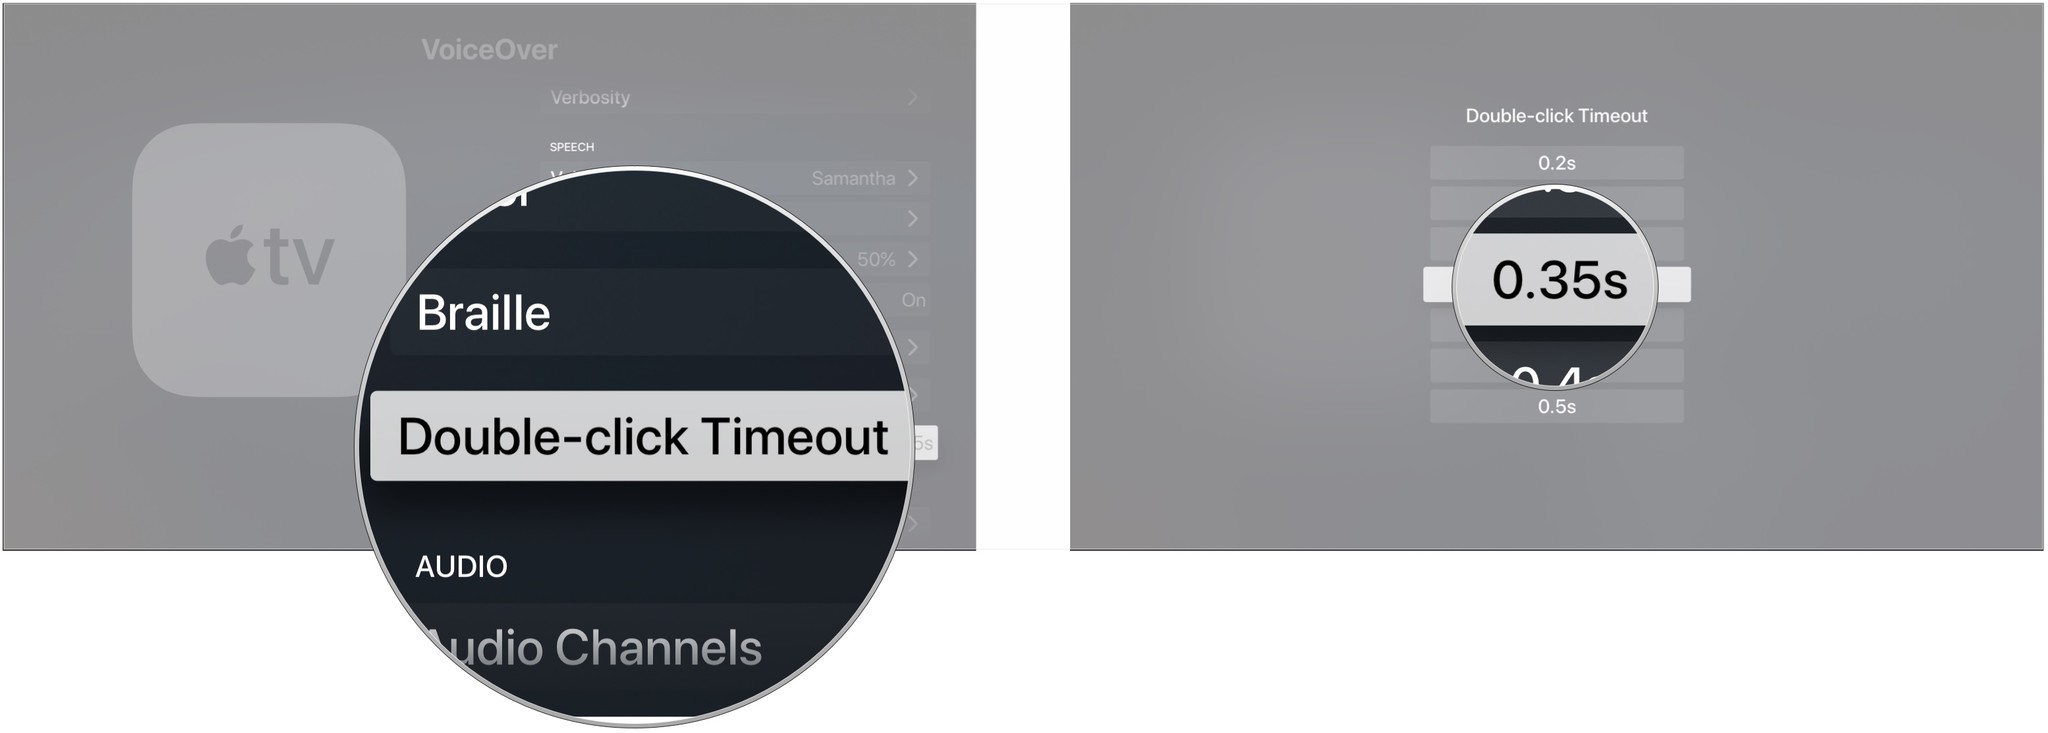 Click Double-click Timeout, click a time